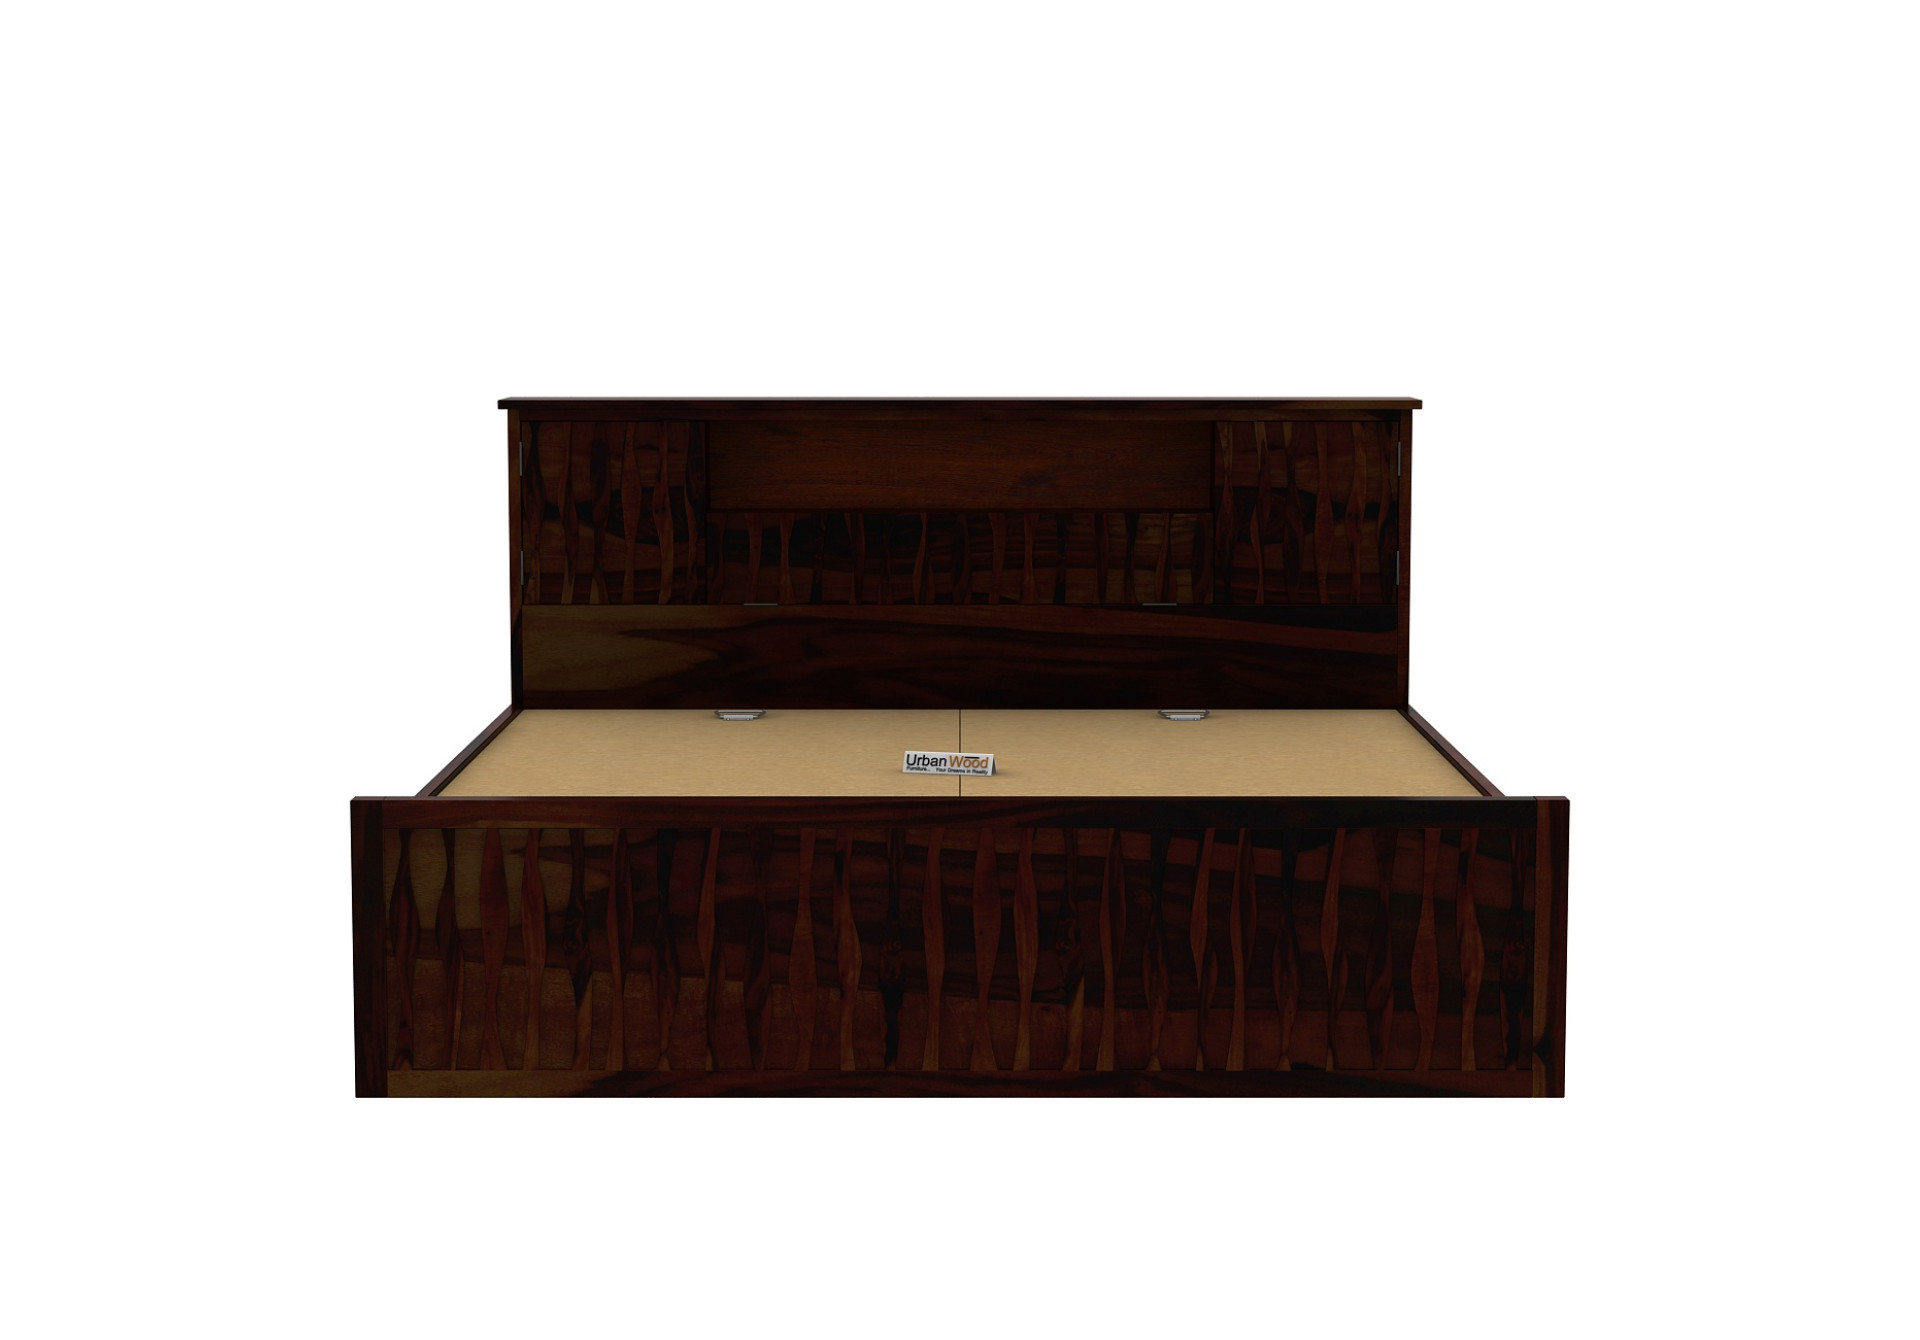 Stack Bed With Drawer Storage ( King Size, Walnut Finish )